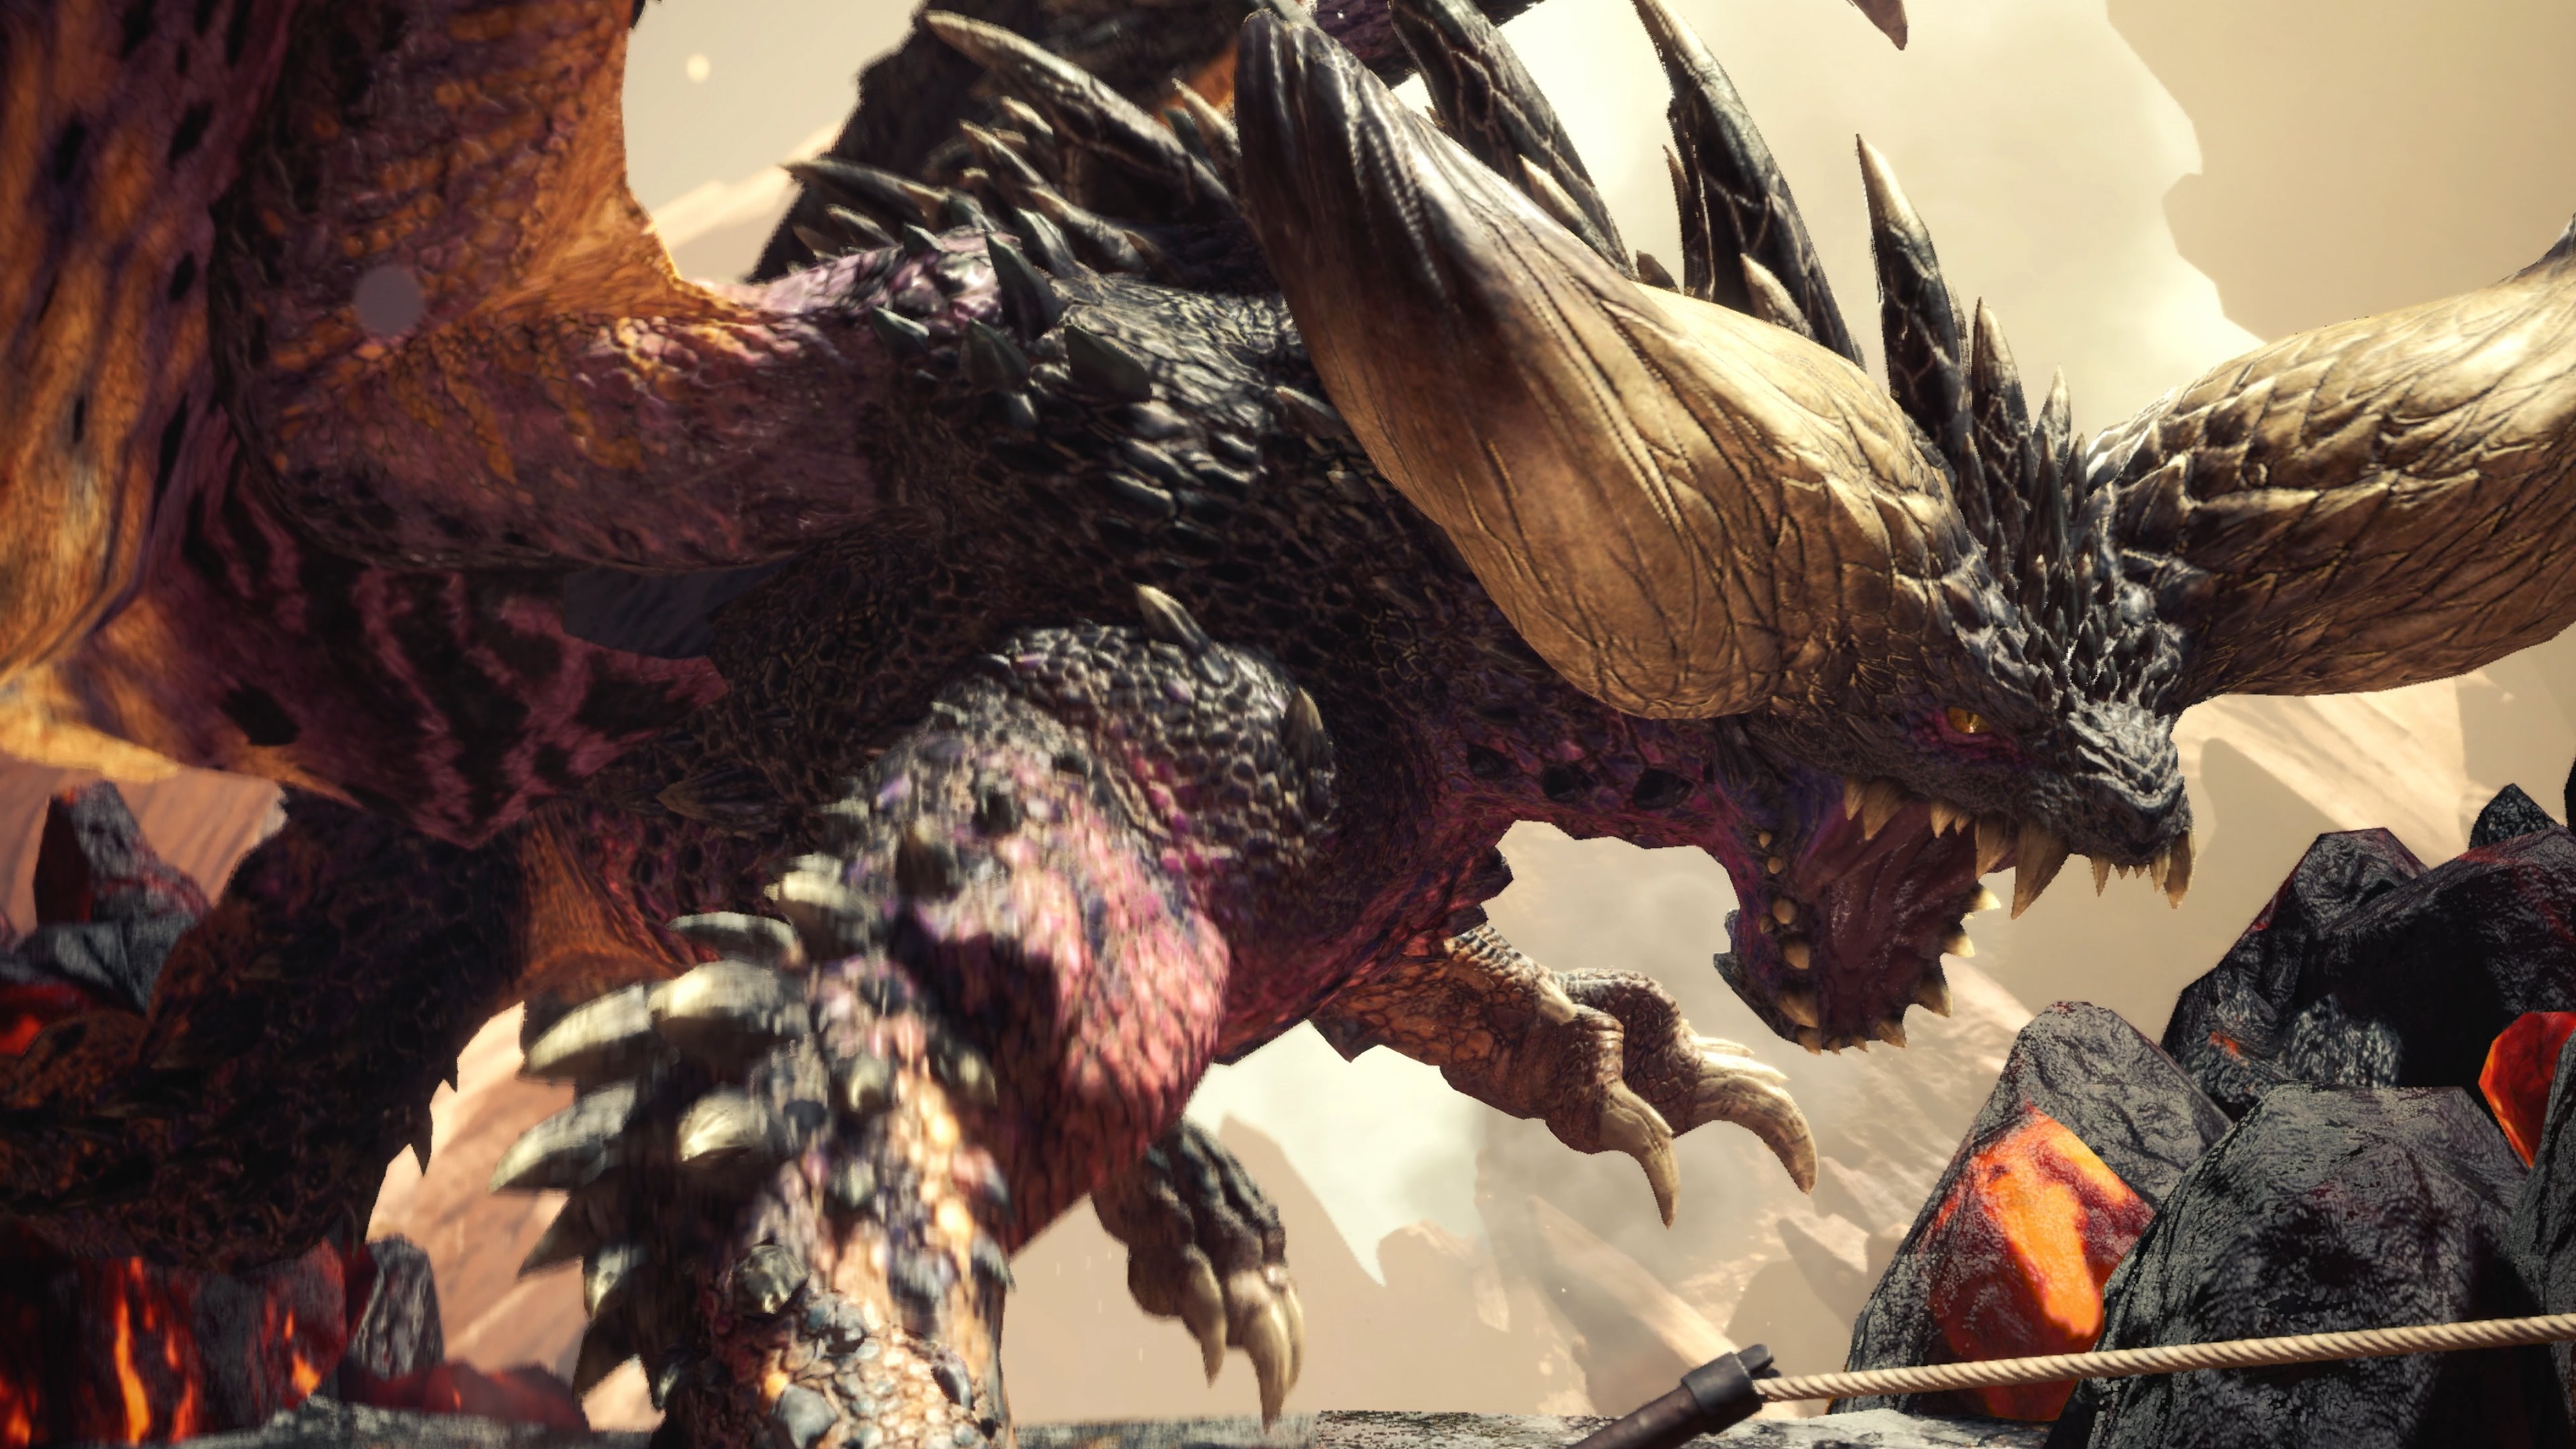 Bannedlagiacrus No Twitter Official Confirmation That Nergigante Is Indeed An Elder Dragon T Co Lsultsisqn Twitter